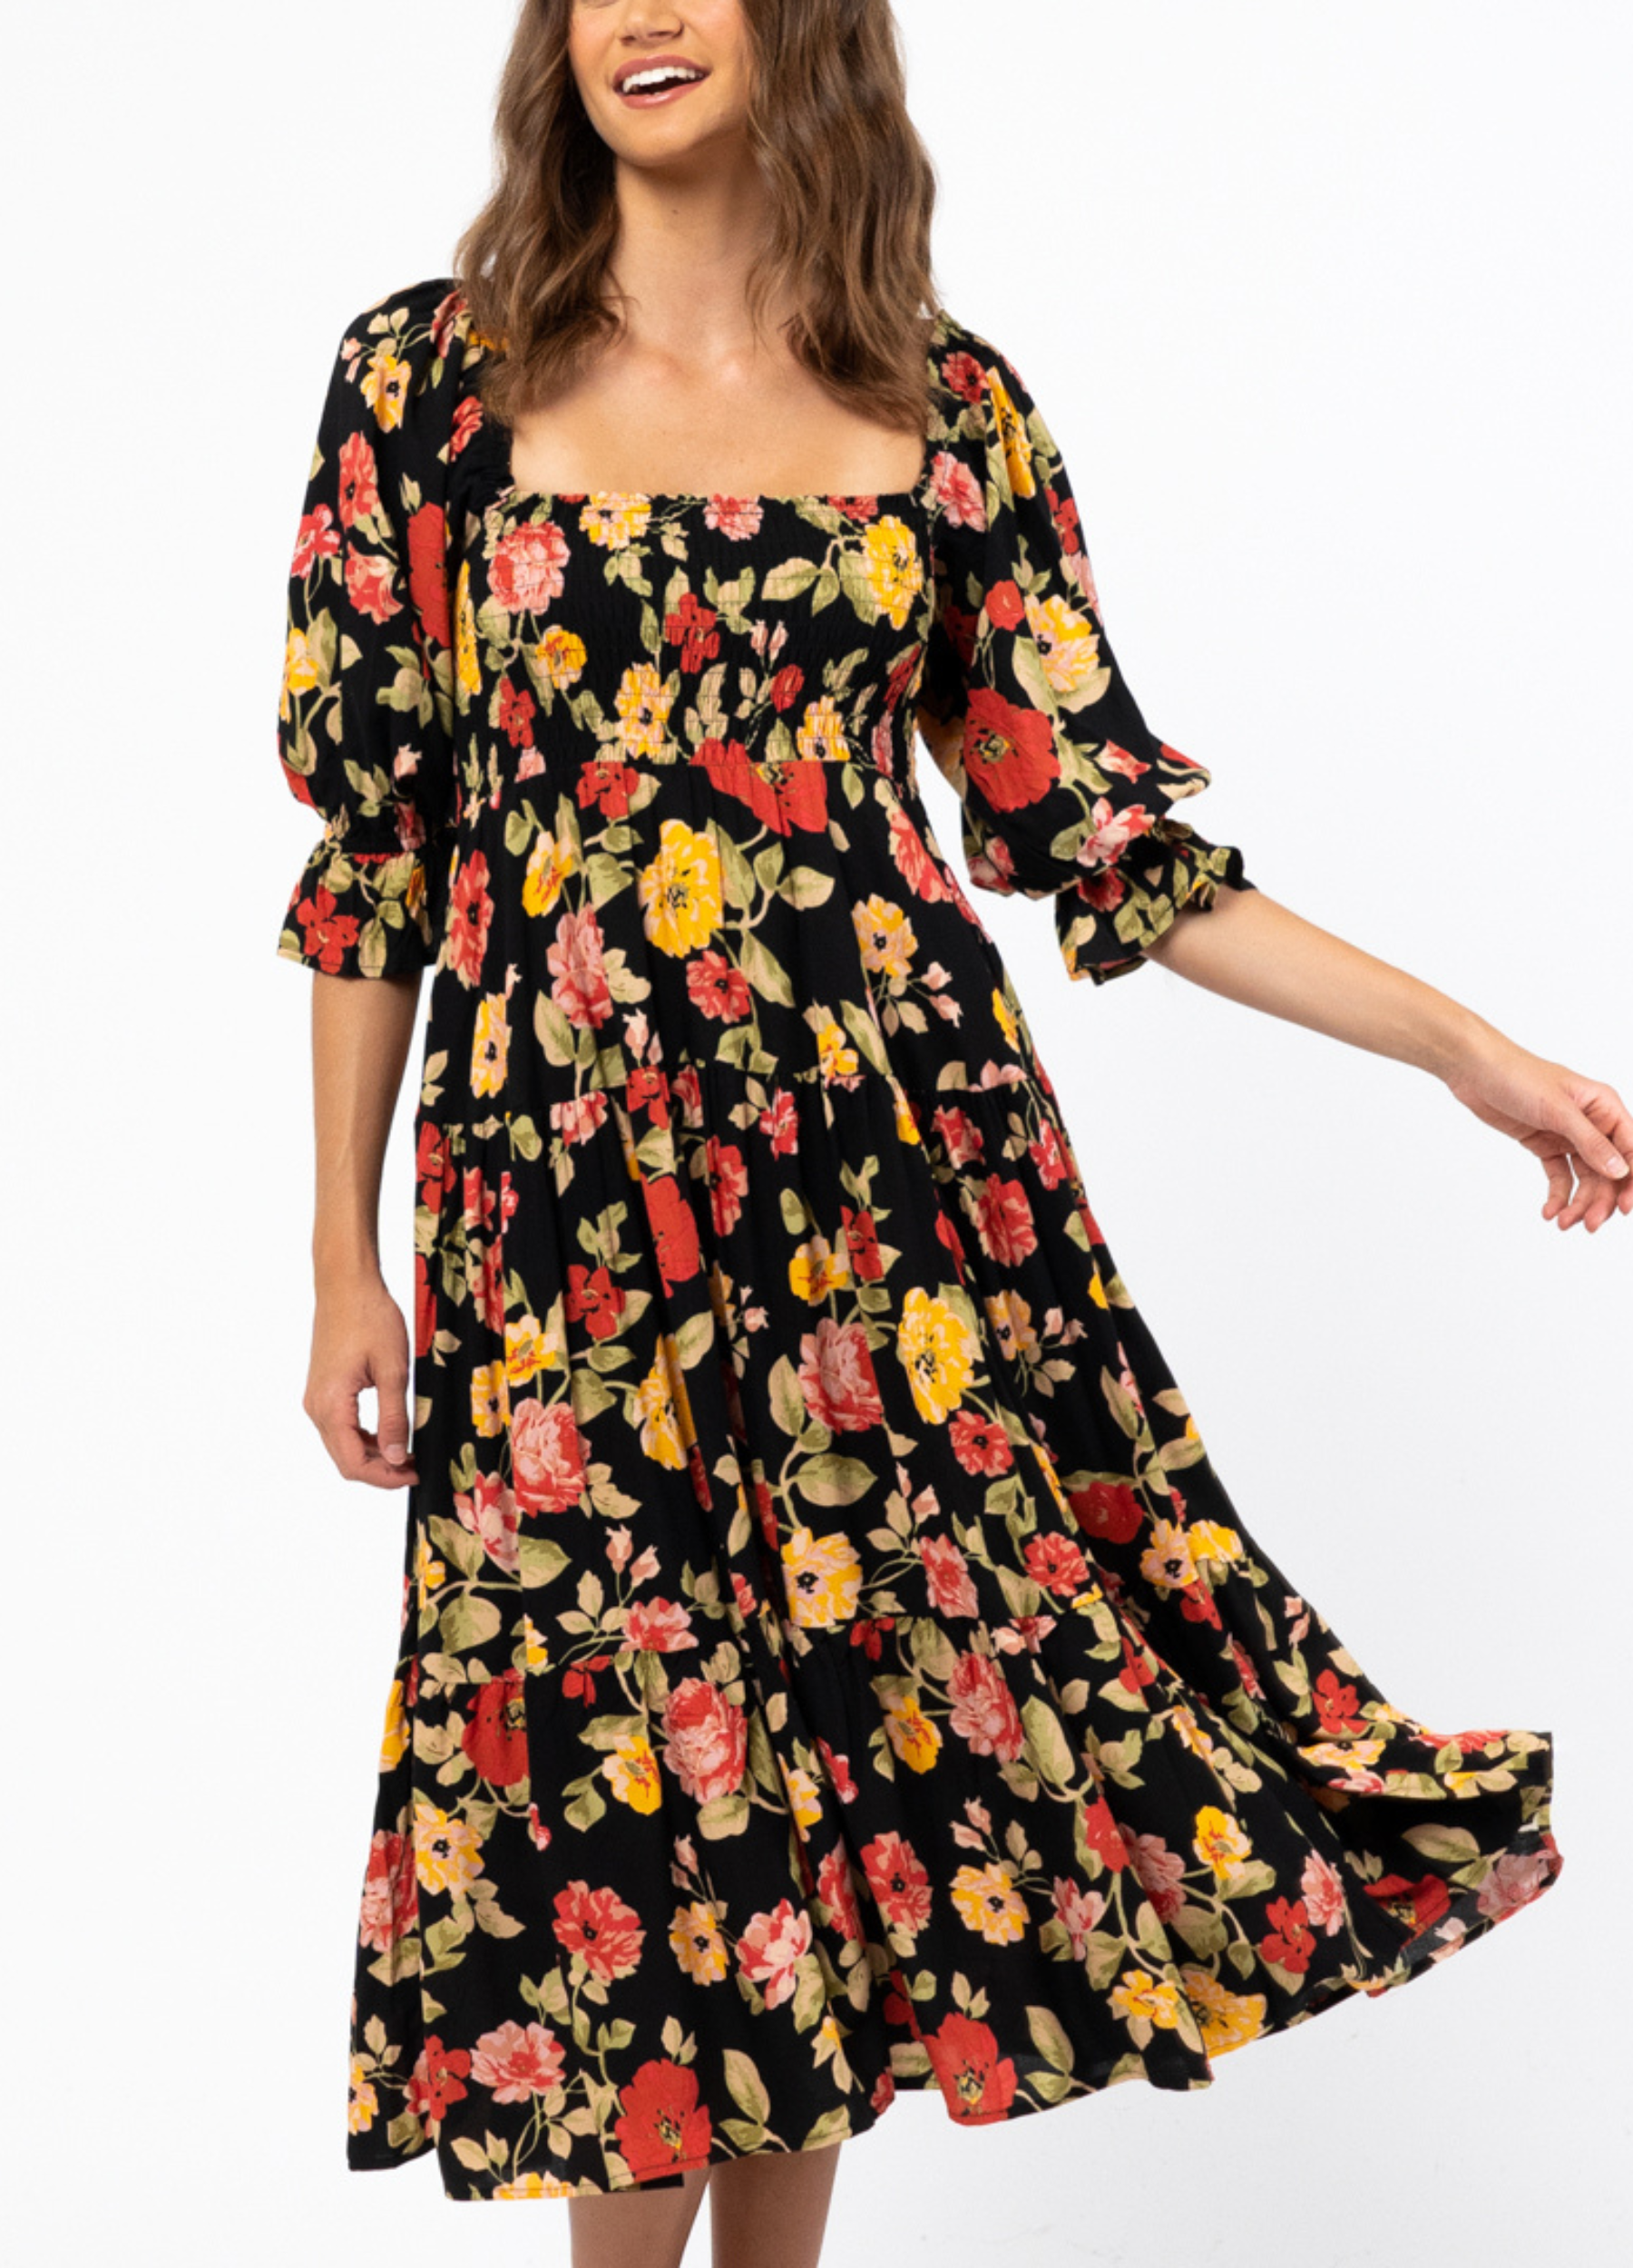 Winter Floral Printed Midi Dress with shirred bust from Australian Fashion Brand Ebby and I